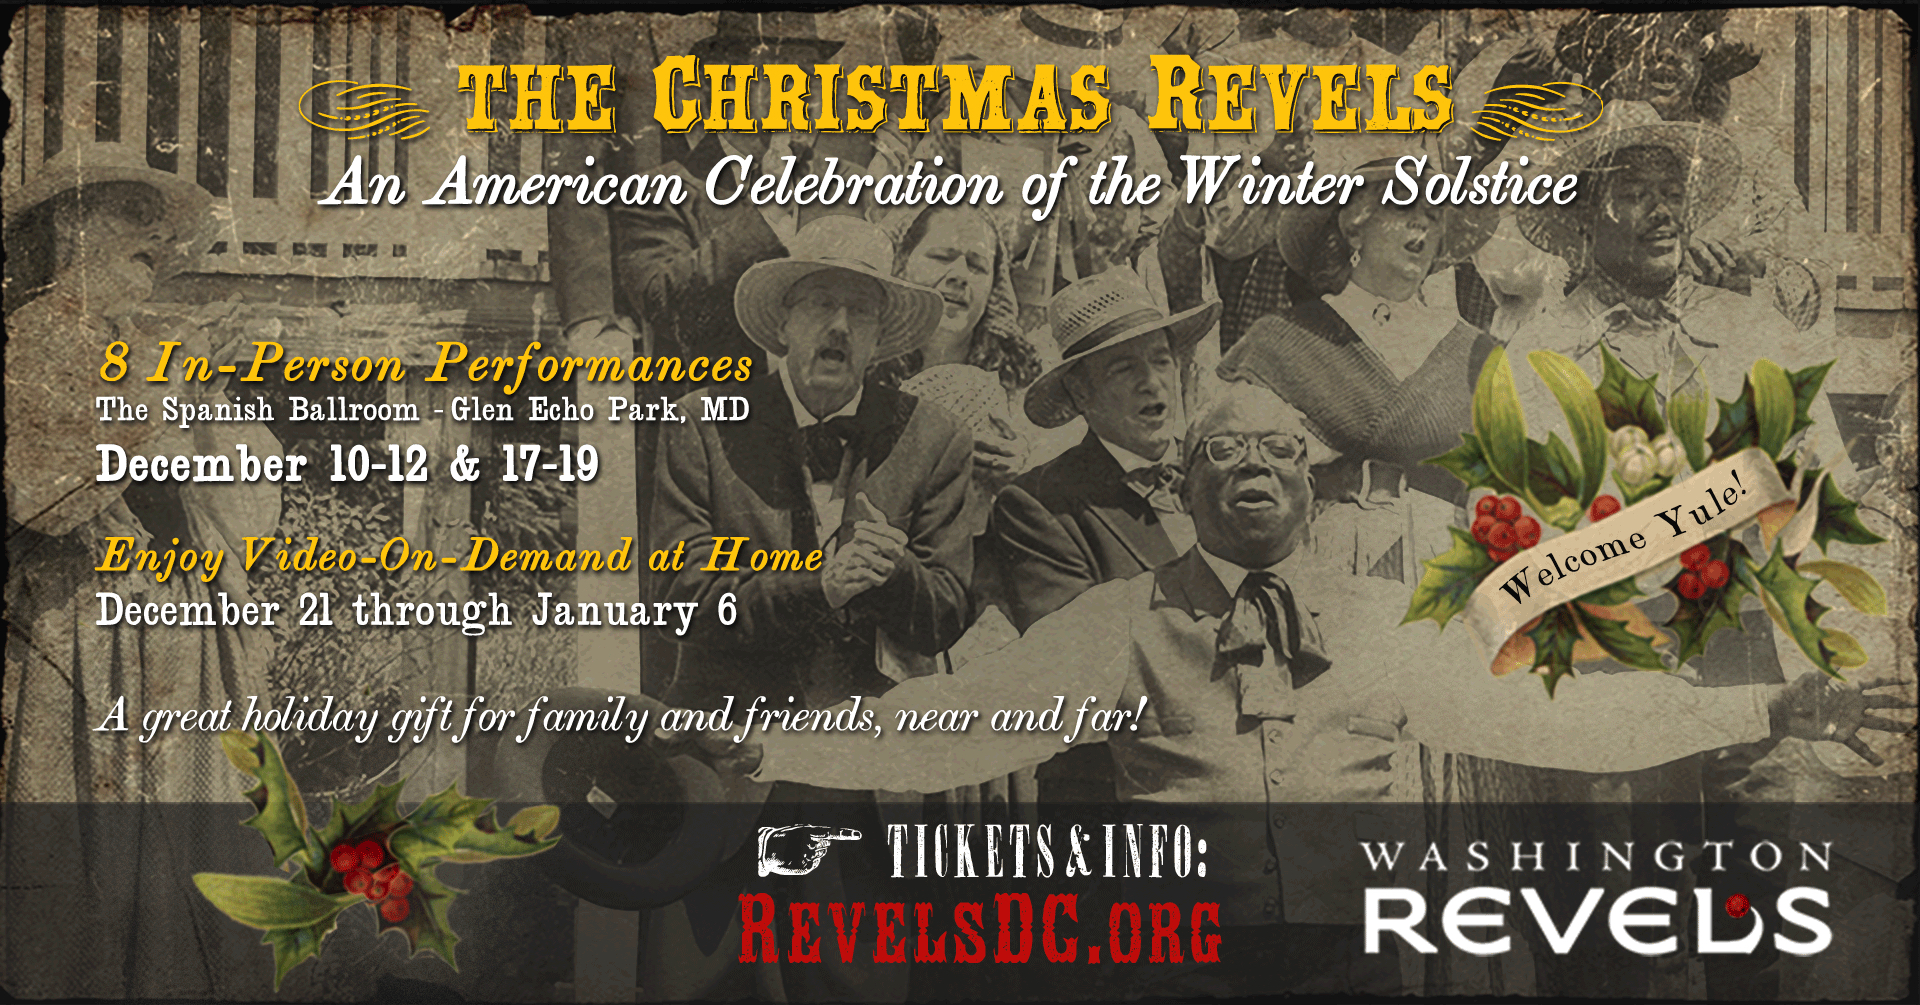 The Christmas Revels: An American Celebration of the Winter Solstice